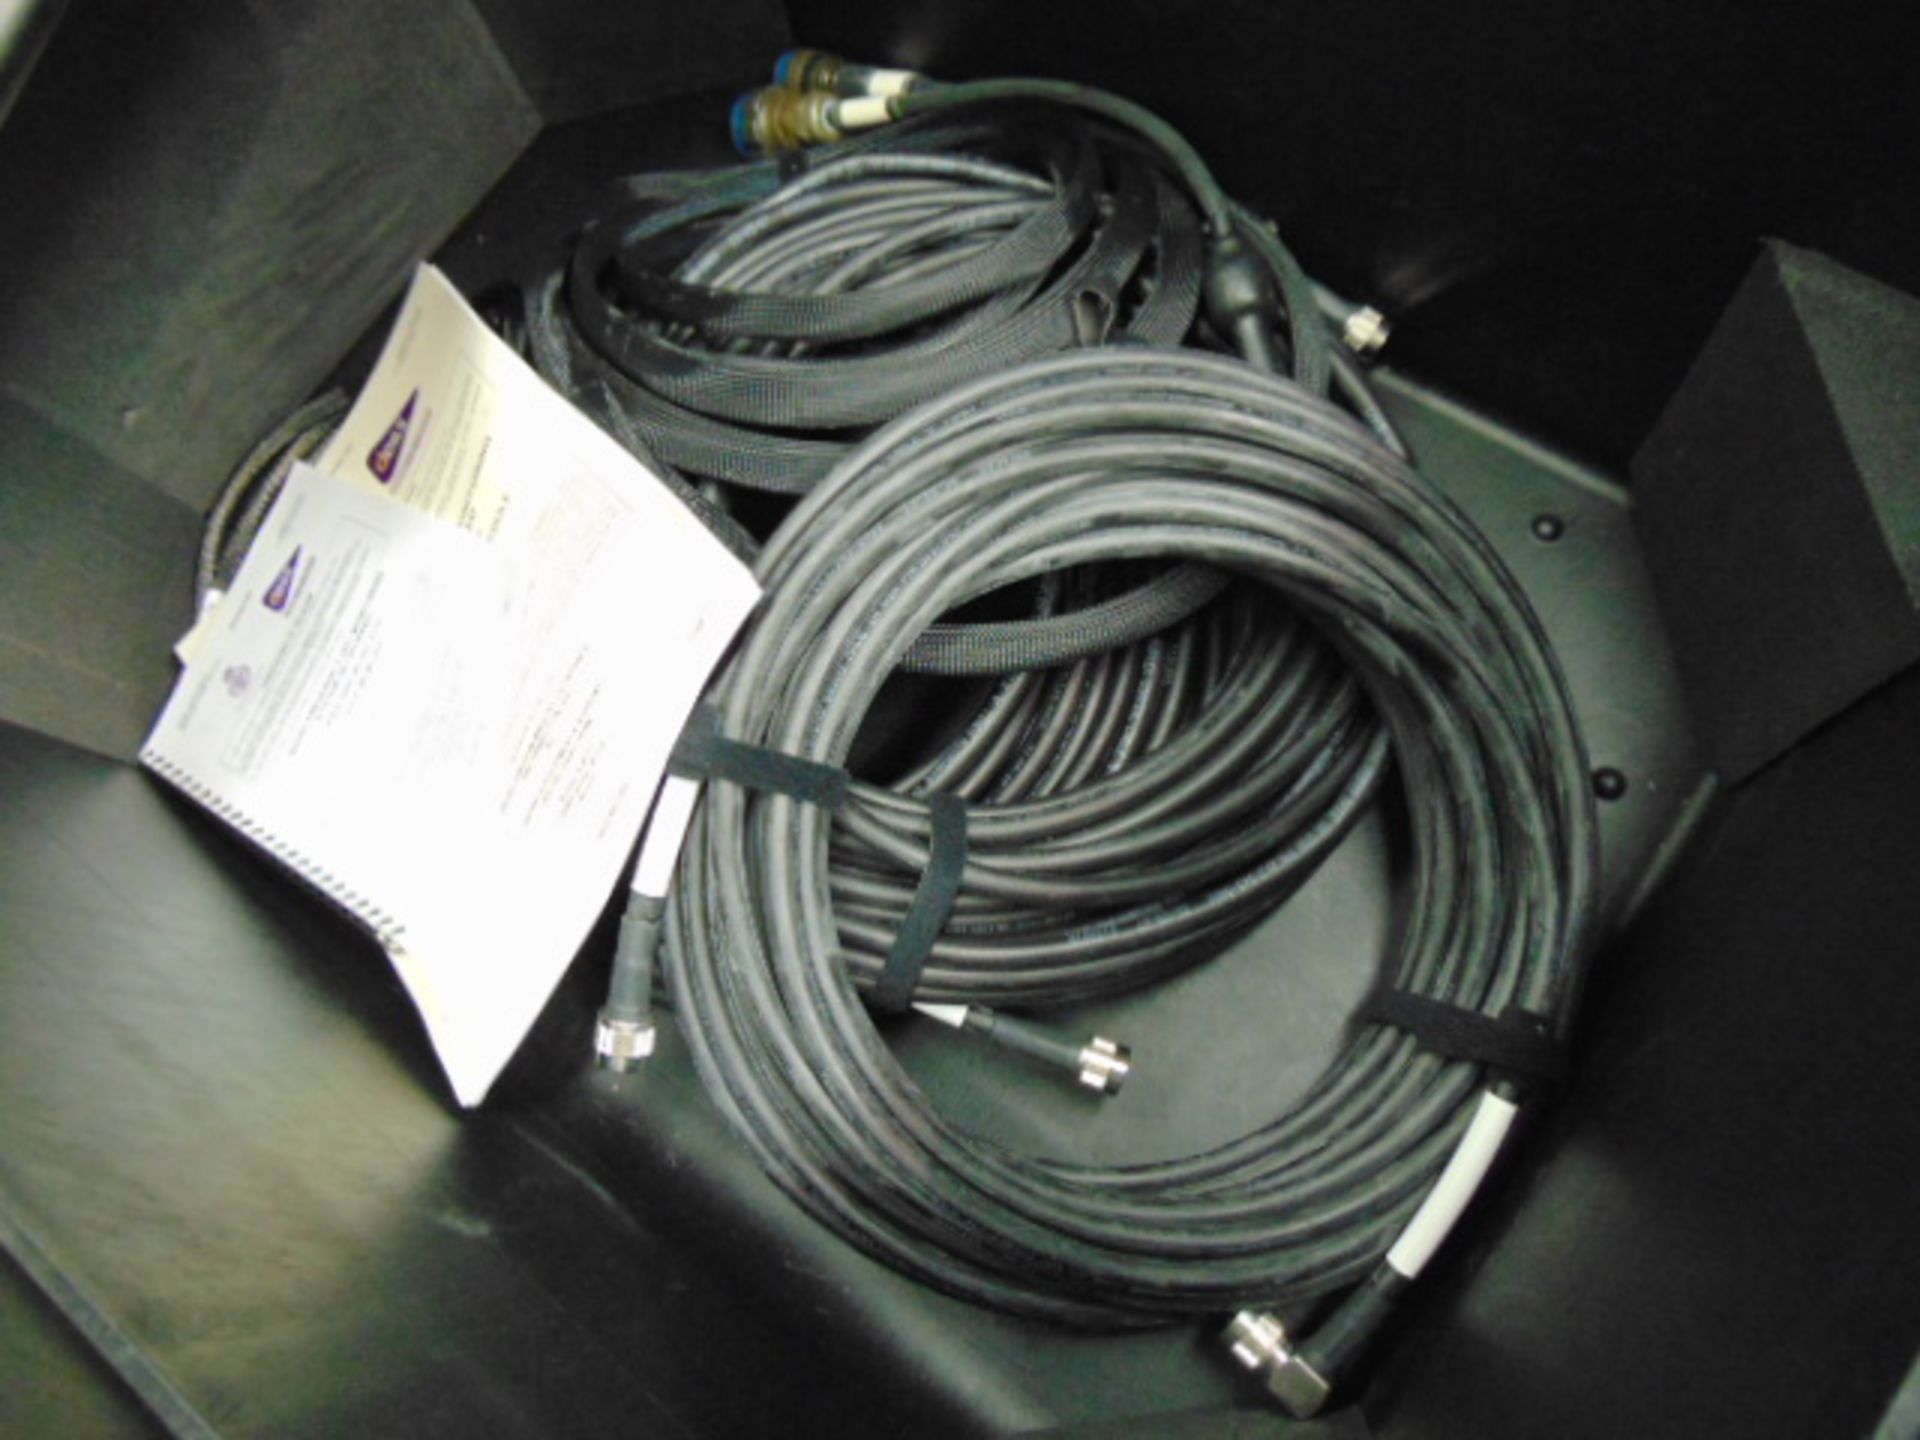 Unissued Radio Frequency (RF) Monitoring System Networked C/W Secure Transit Cases - Image 11 of 13